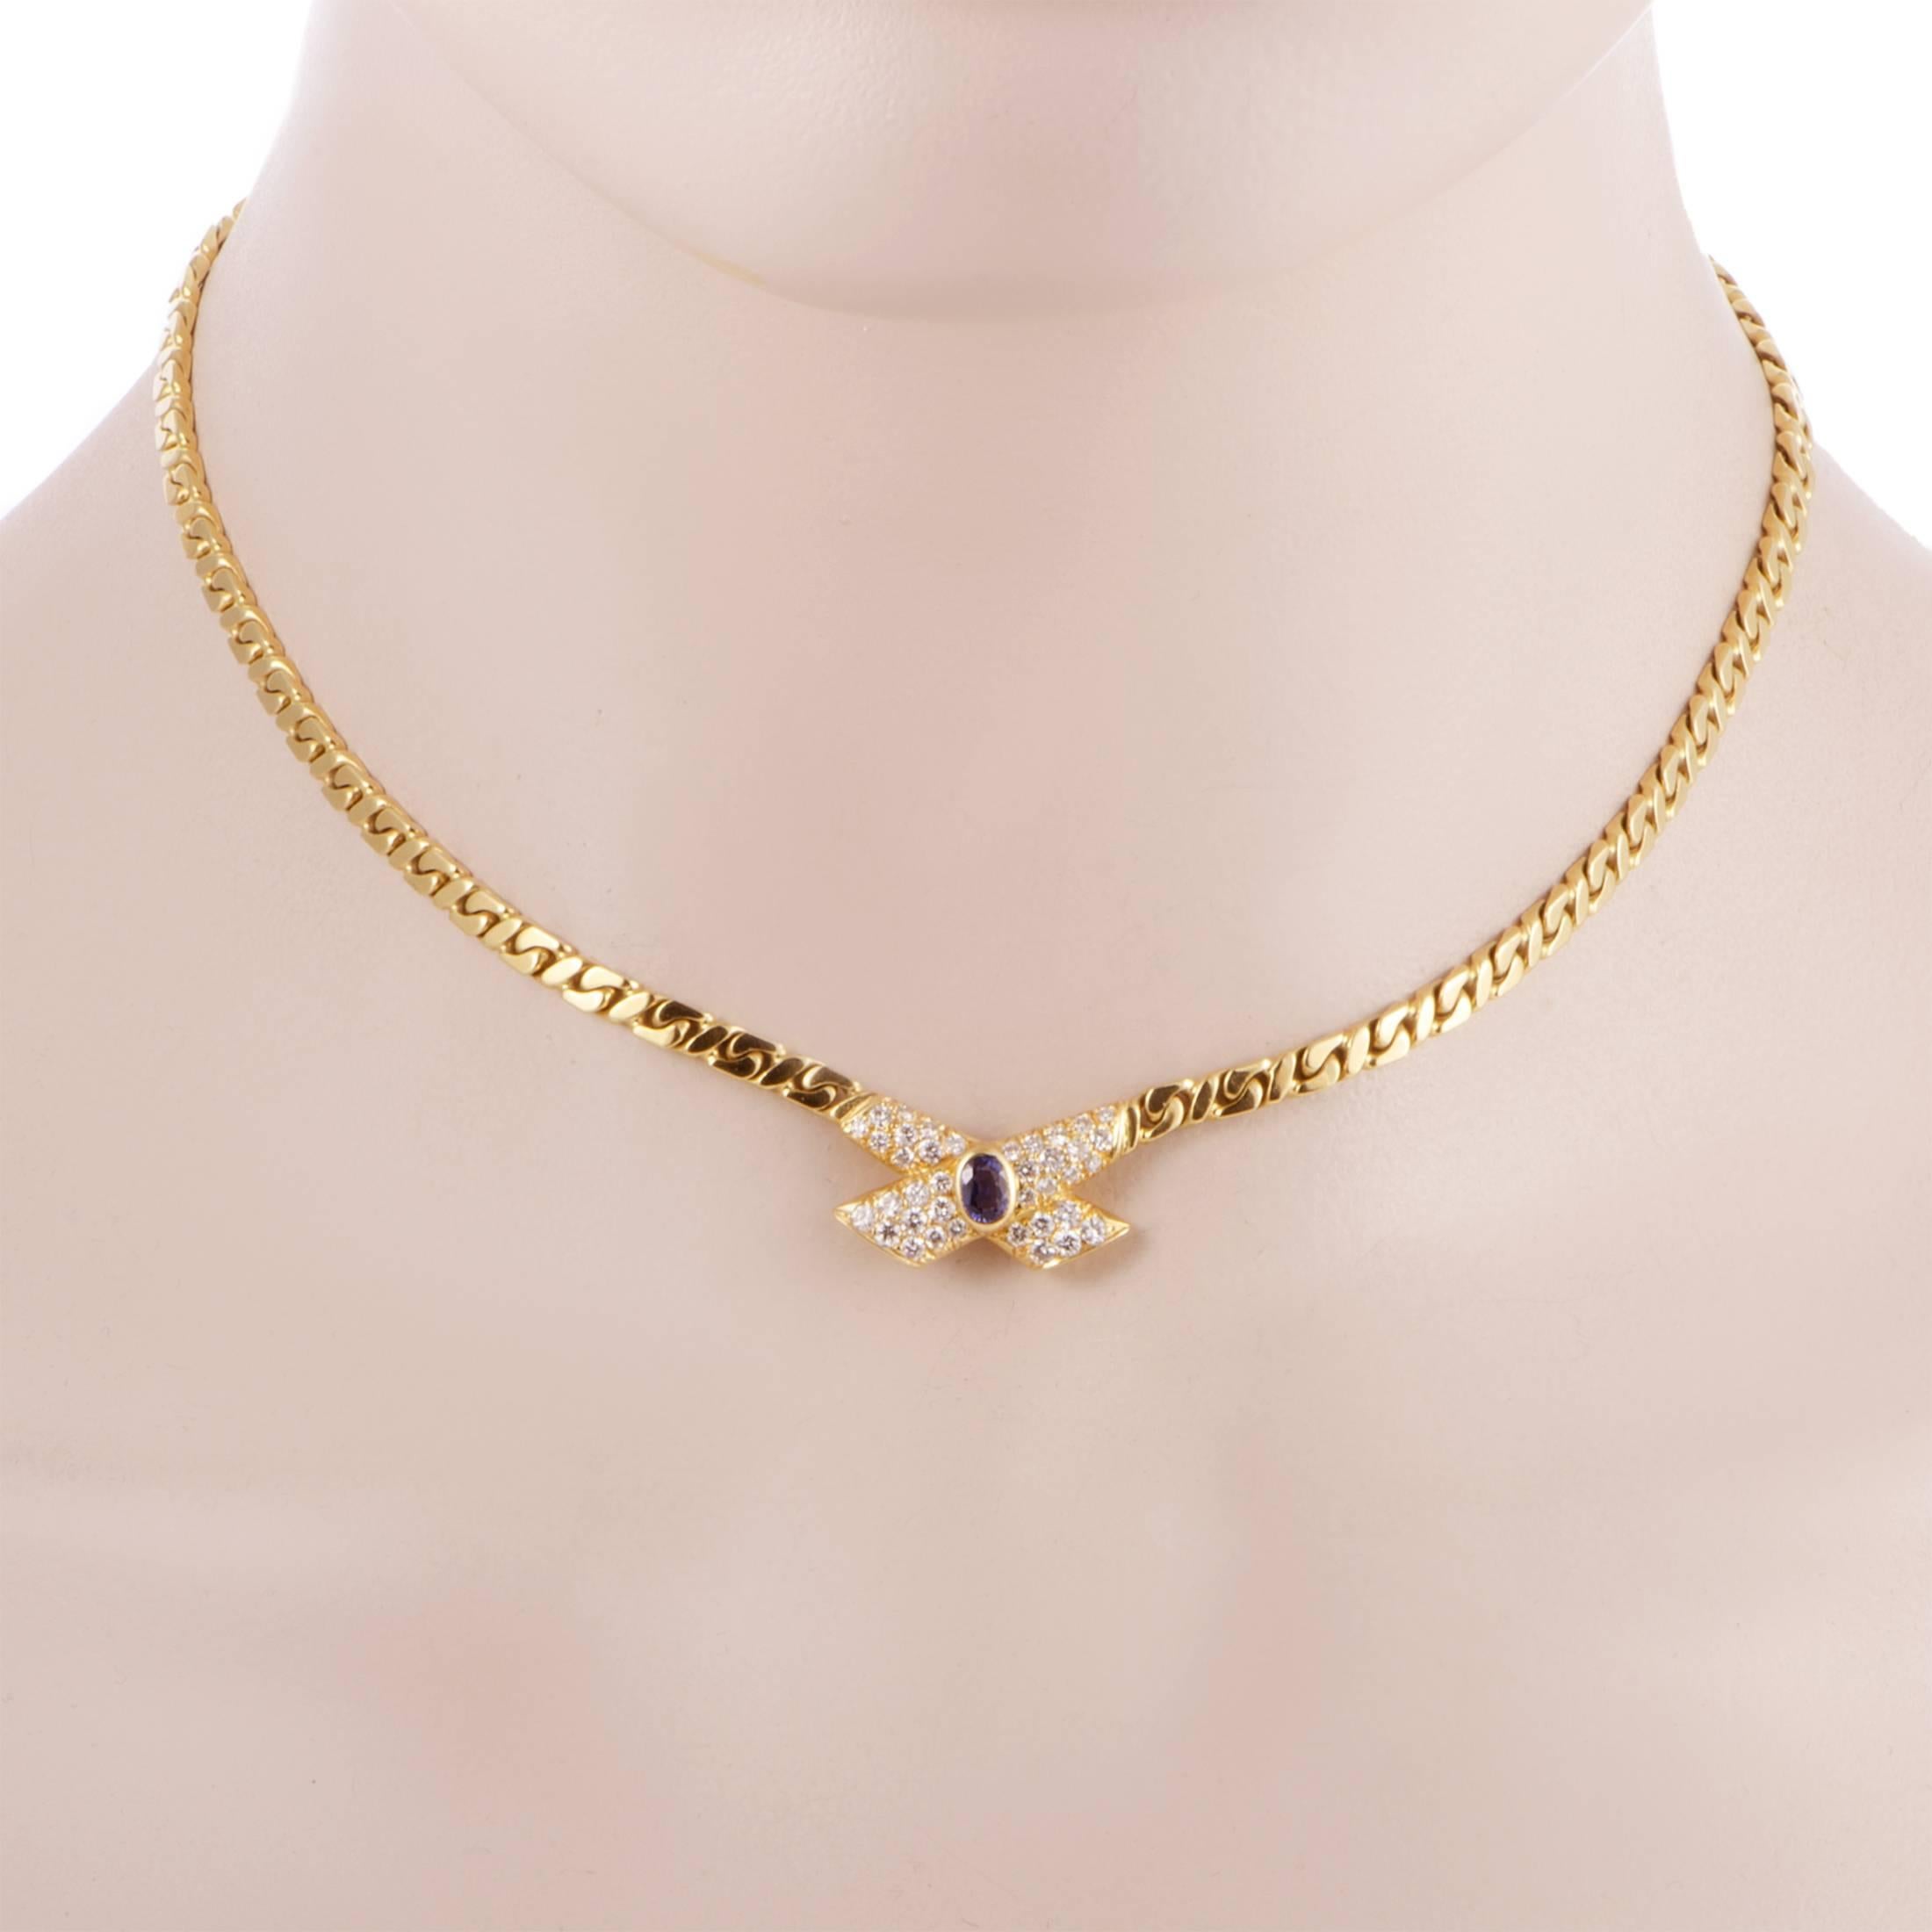 From the immaculate gleam and intriguing pattern of the 18K yellow gold chain to the luxurious resplendence of diamonds totaling 0.85ct and regal allure of the 0.45ct sapphire, this majestic necklace from Van Cleef & Arpels is a fantastic sight